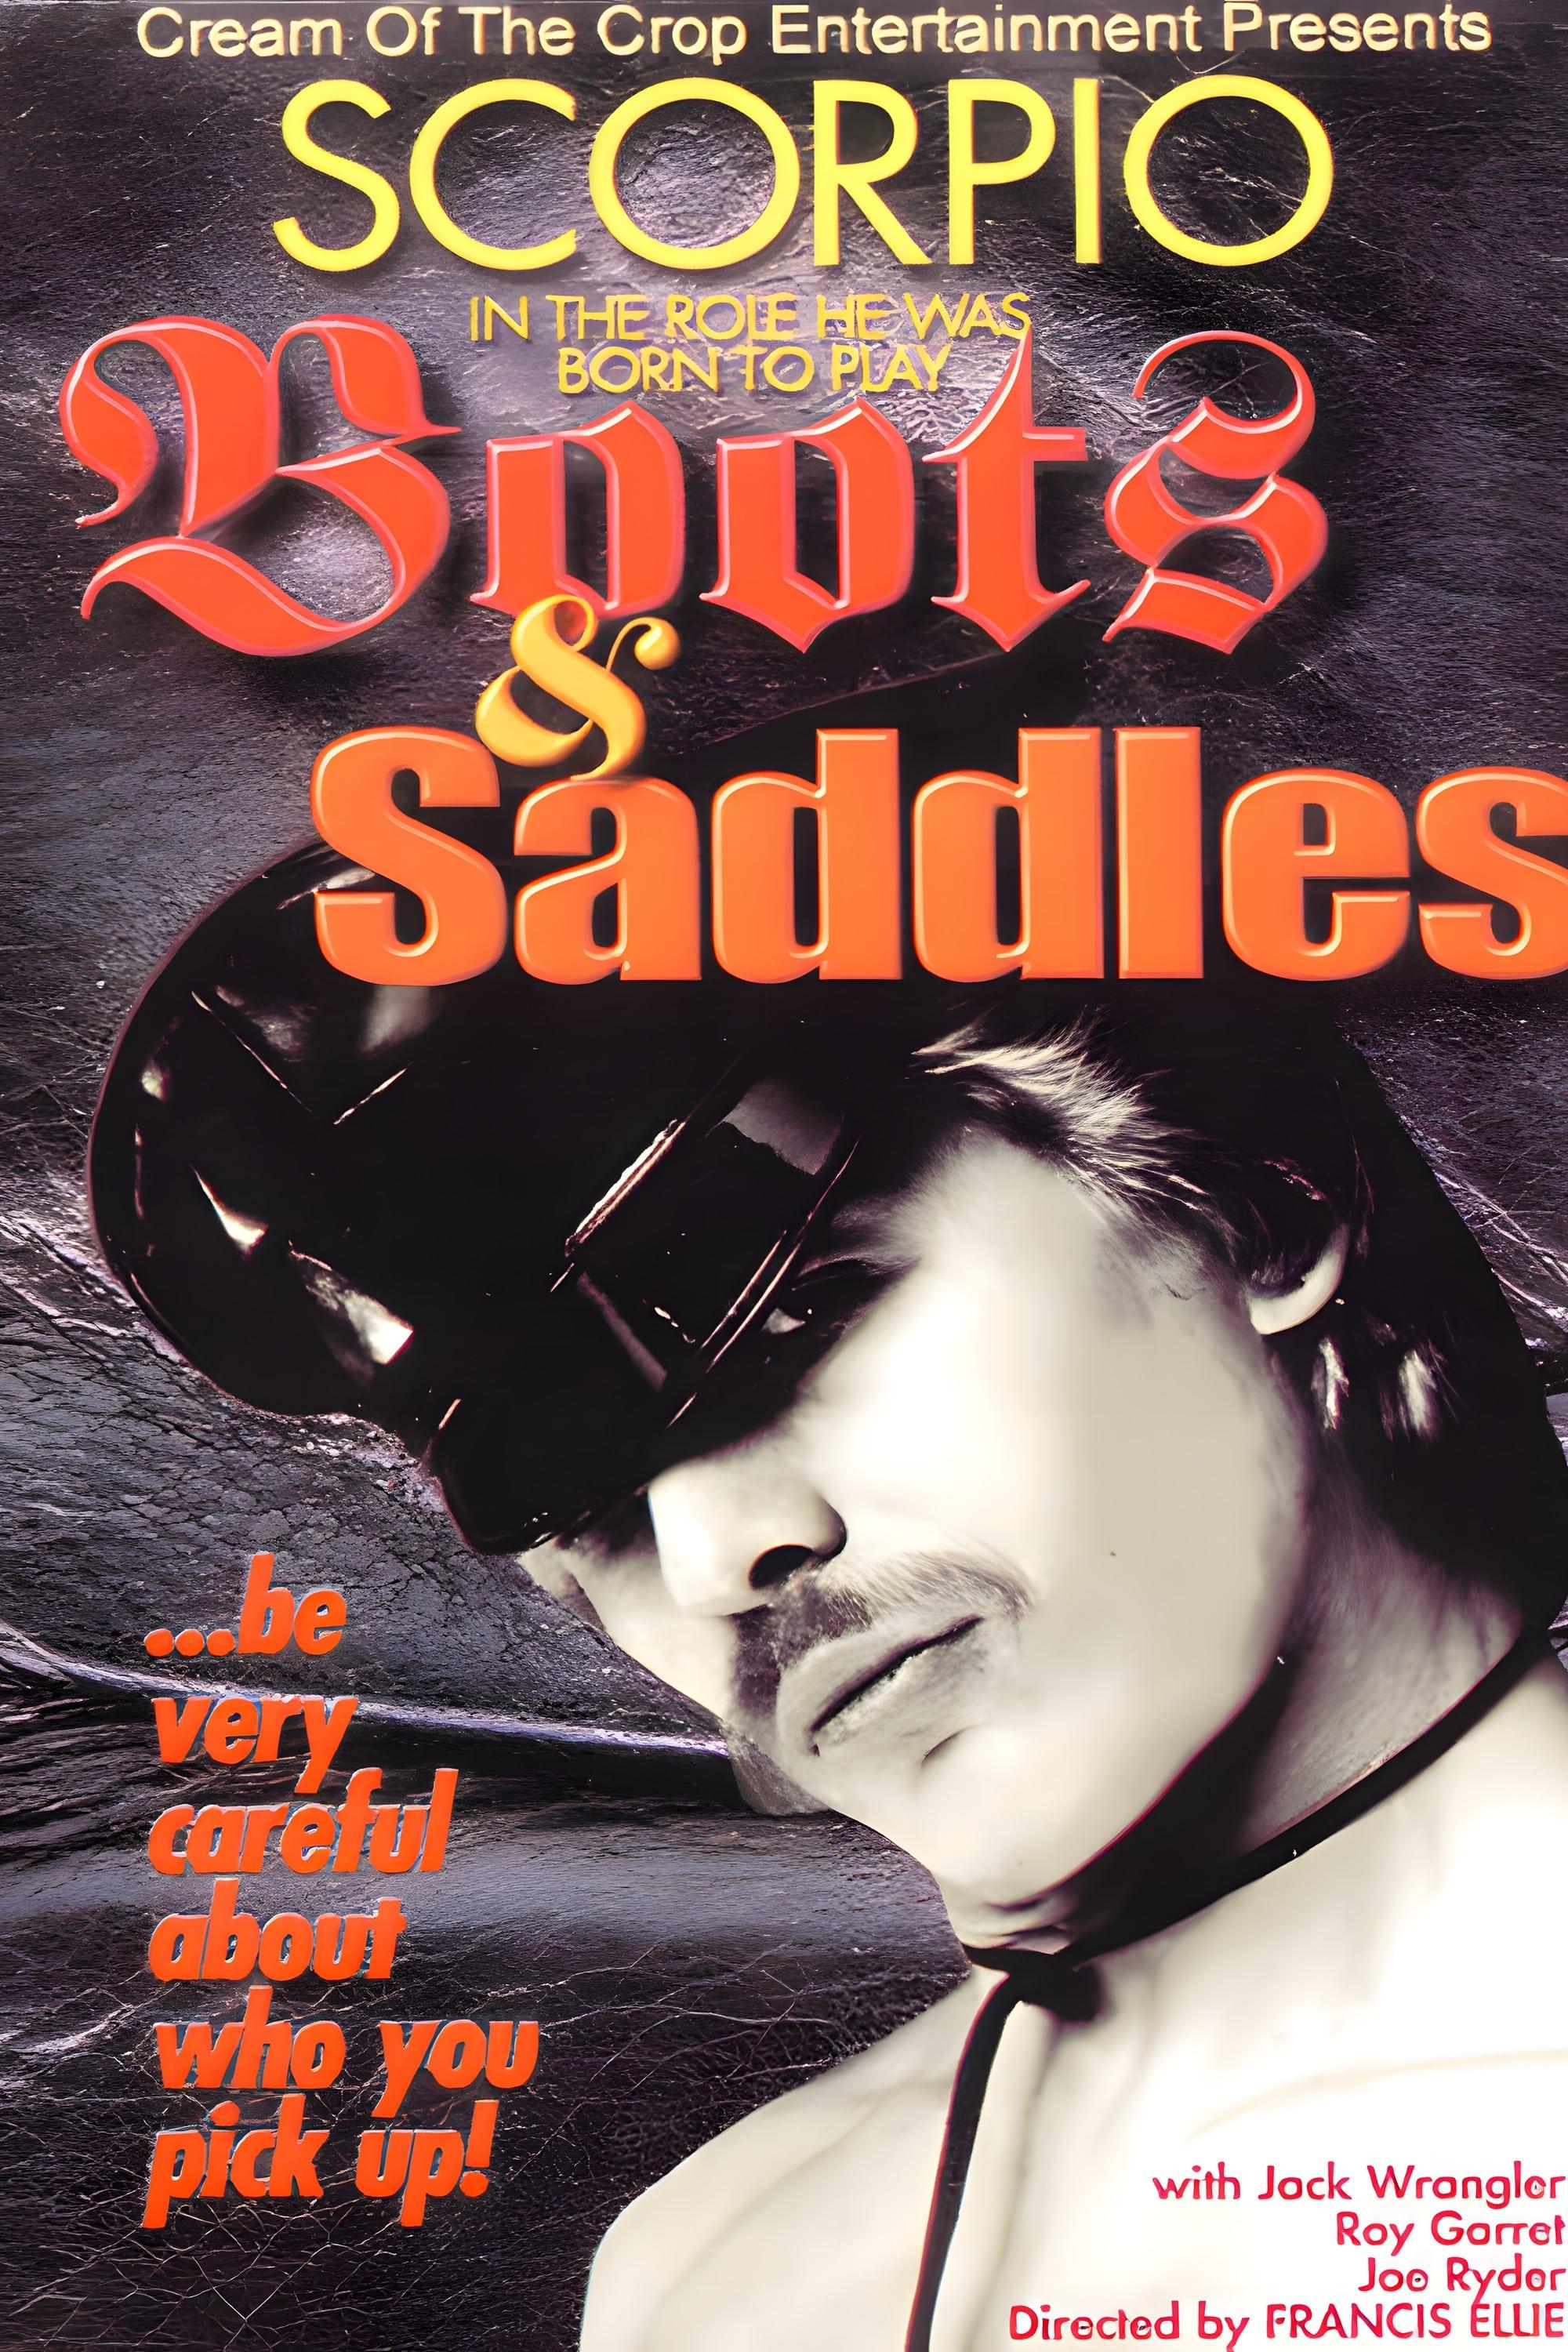 Boots & Saddles poster